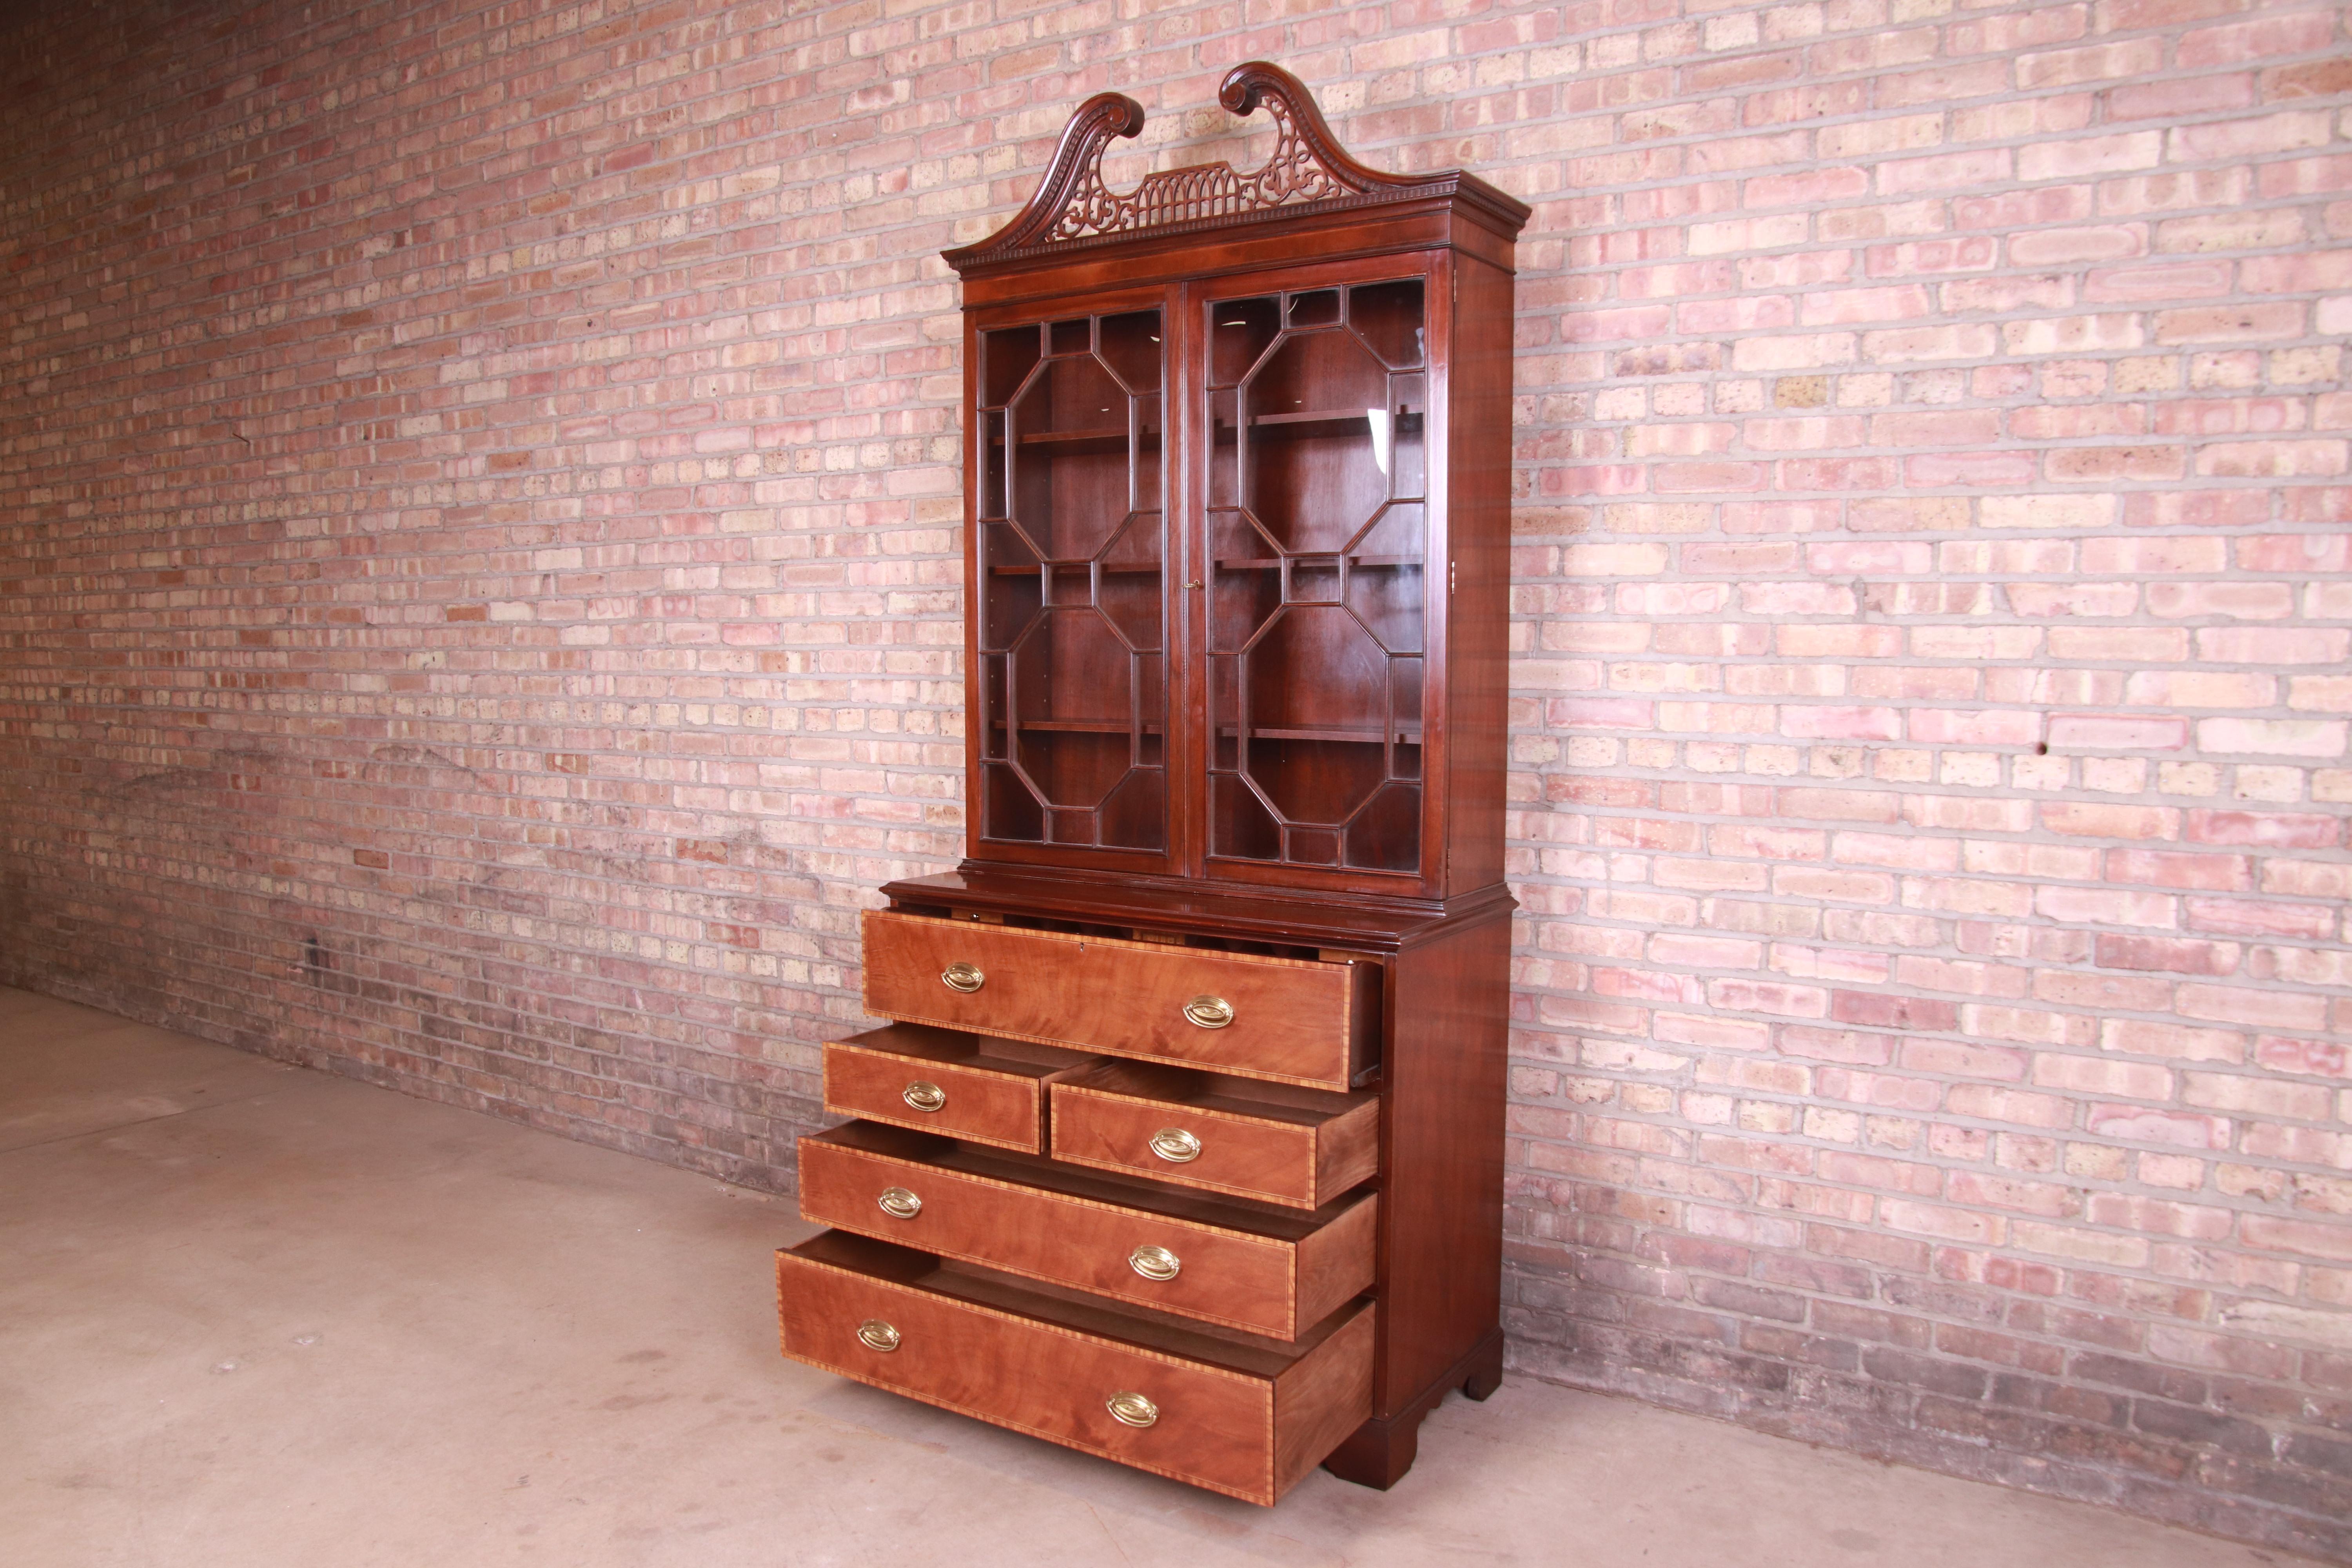 Baker Furniture Chippendale Mahogany Breakfront Bookcase with Secretary Desk 7